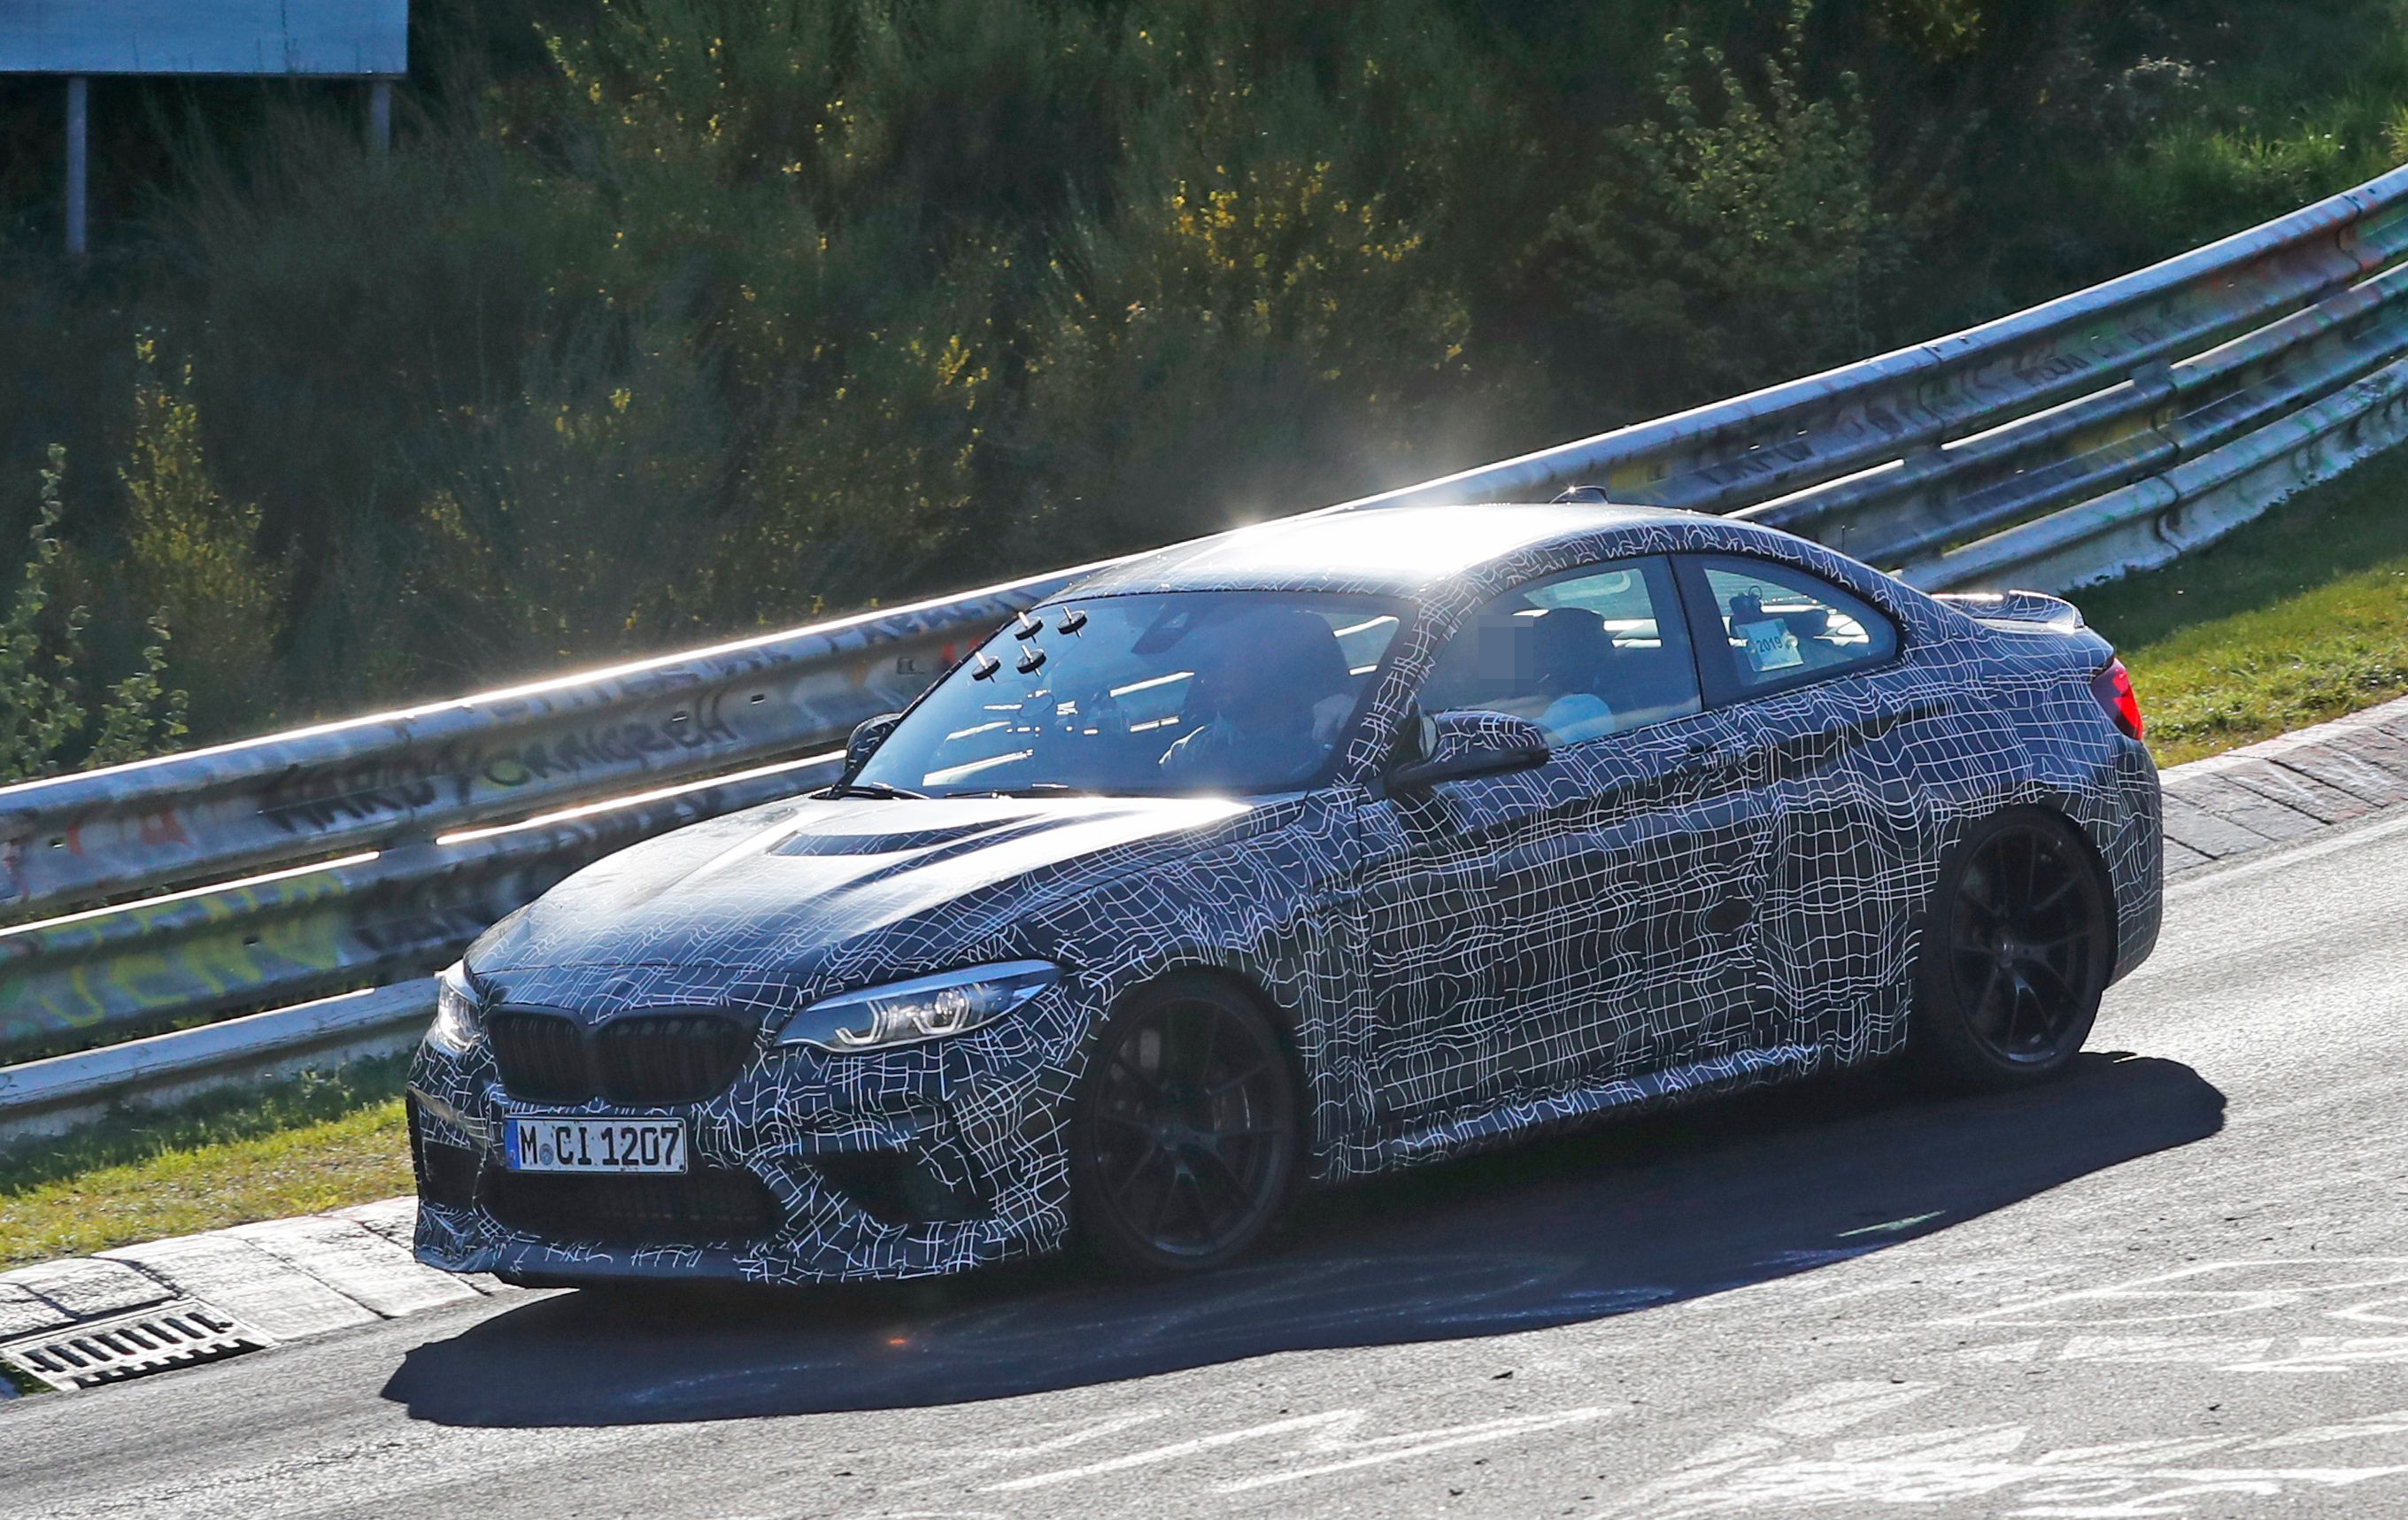 New Leaks Indicate That the BMW M2 CS Could Be Lighter, Offer More Power Than Expected